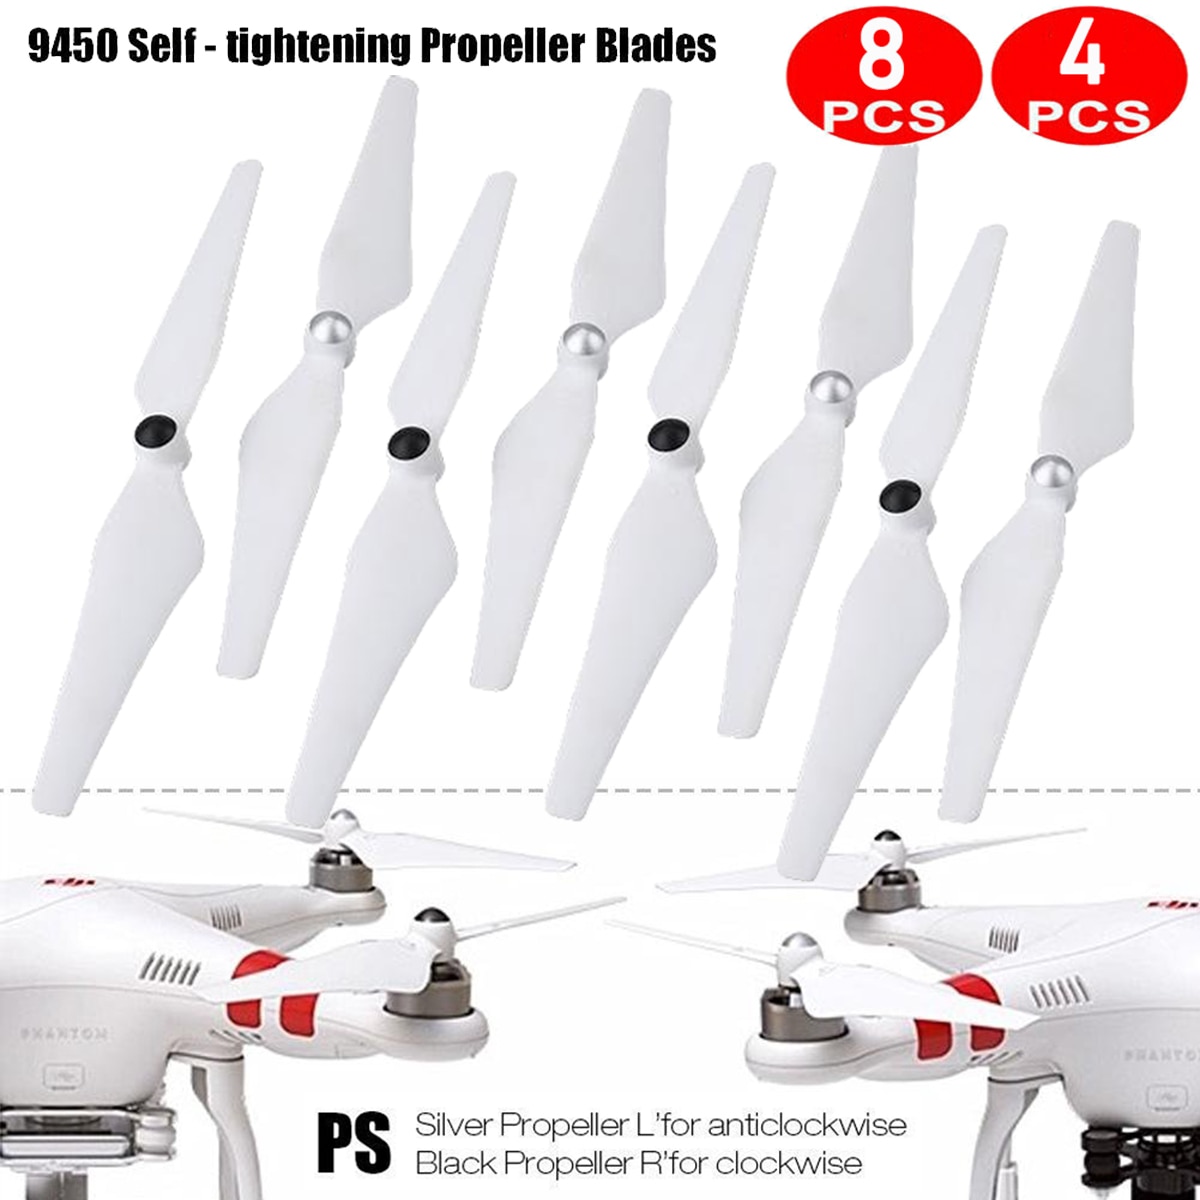 8 Pcs Propellers For DJI Phantom 3 and 2 Drone 3A 3P 3S Self-Tightening Spare